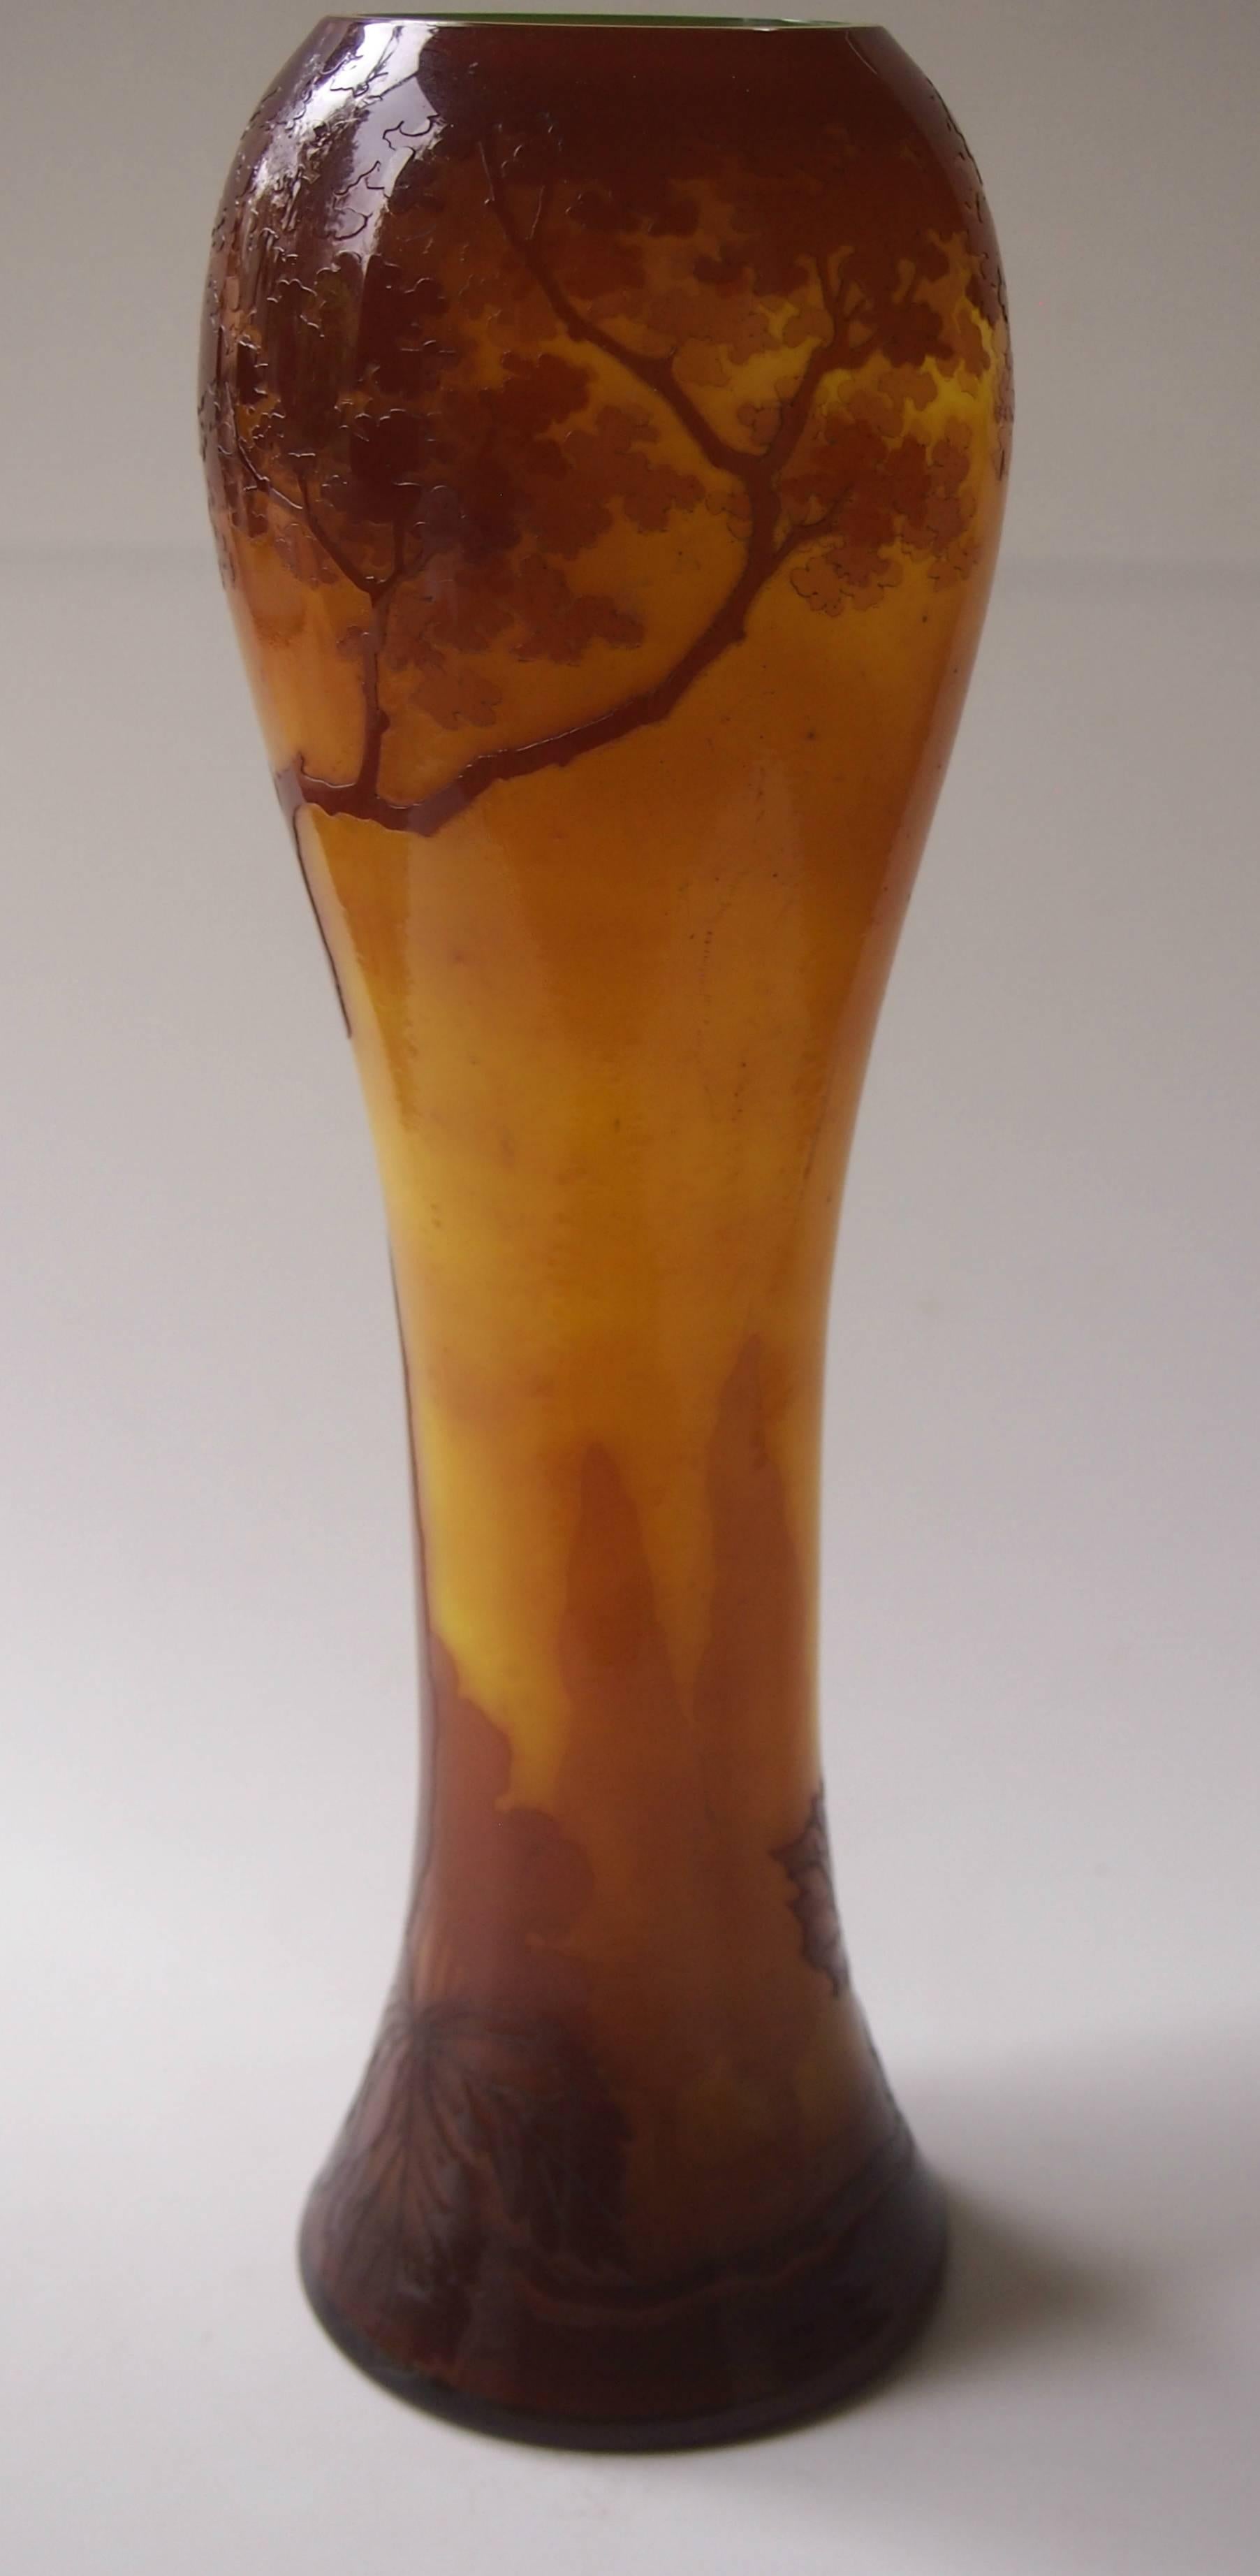 Fine tall, Art Nouveau brown over orange, Riedel cameo landscape vase depicting trees and stylised foliage - a squat version of this vase can be seen in a lamp form in the Riedel book.

Riedel was one of the greatest glass houses in Bohemian they